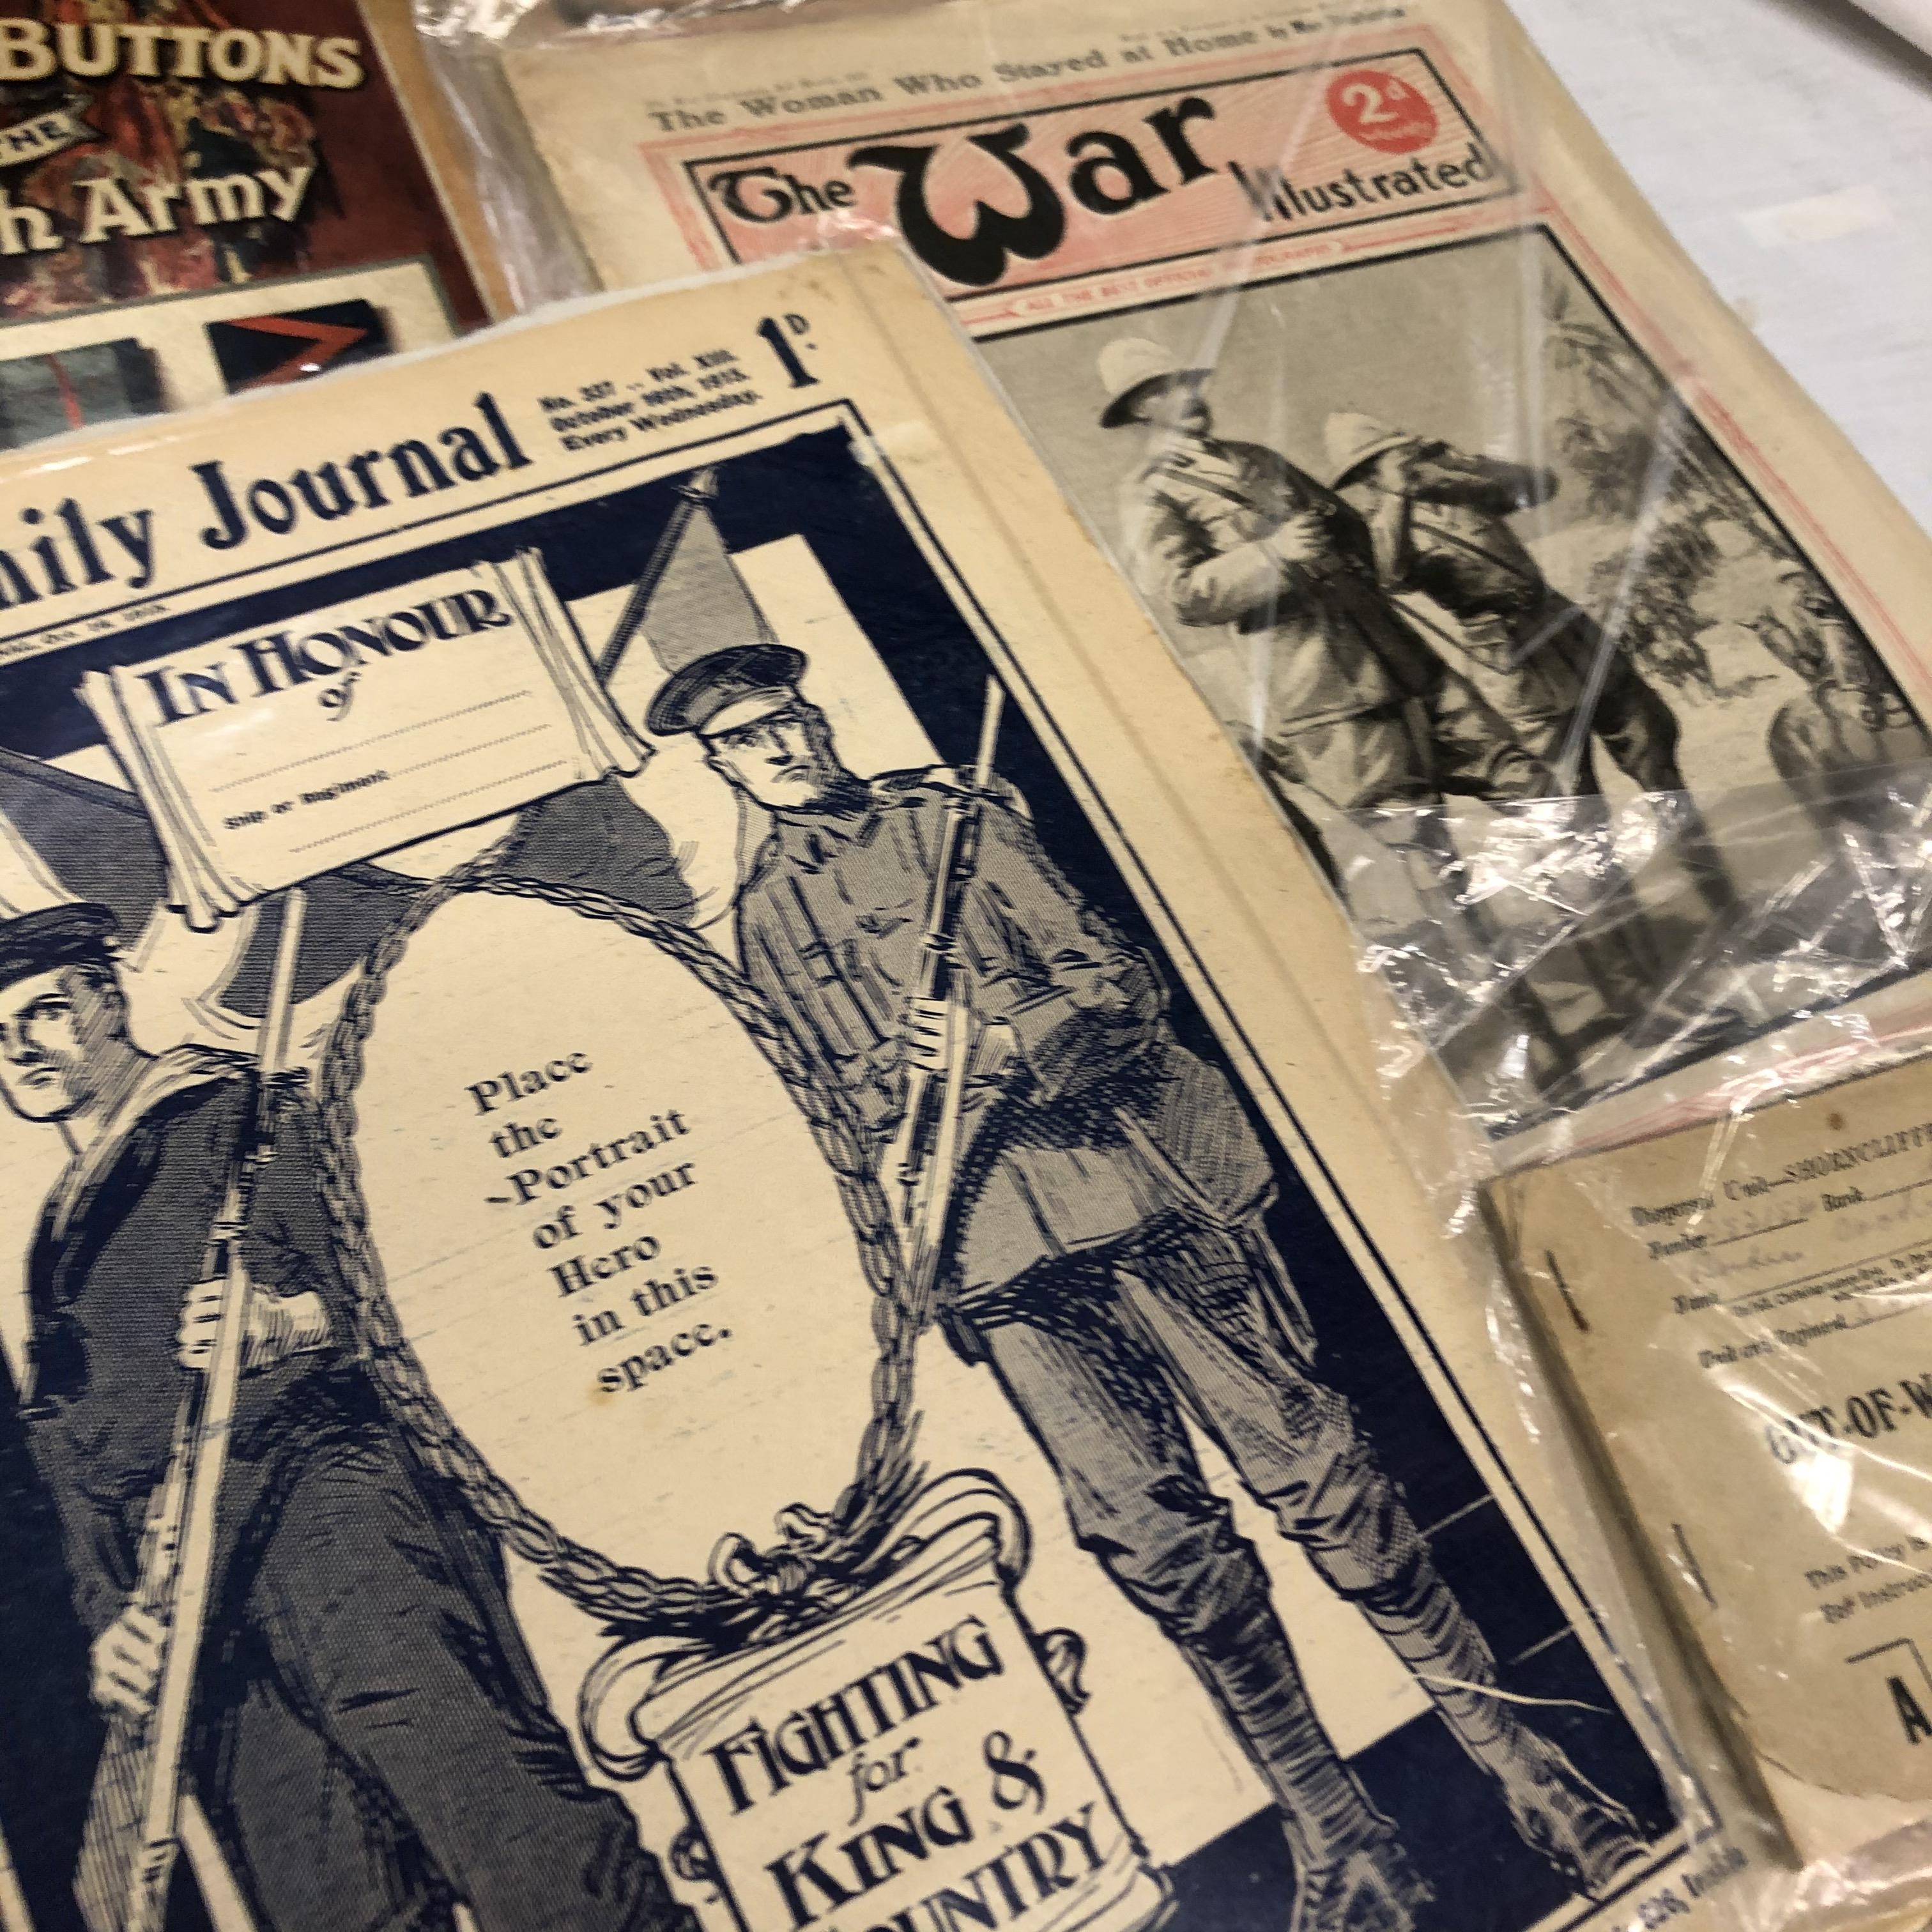 WWI RELATED EPHEMERA INCLUDING COPIES OF THE WAR ILLUSTRATED, THE FAMILY JOURNAL, - Image 8 of 9